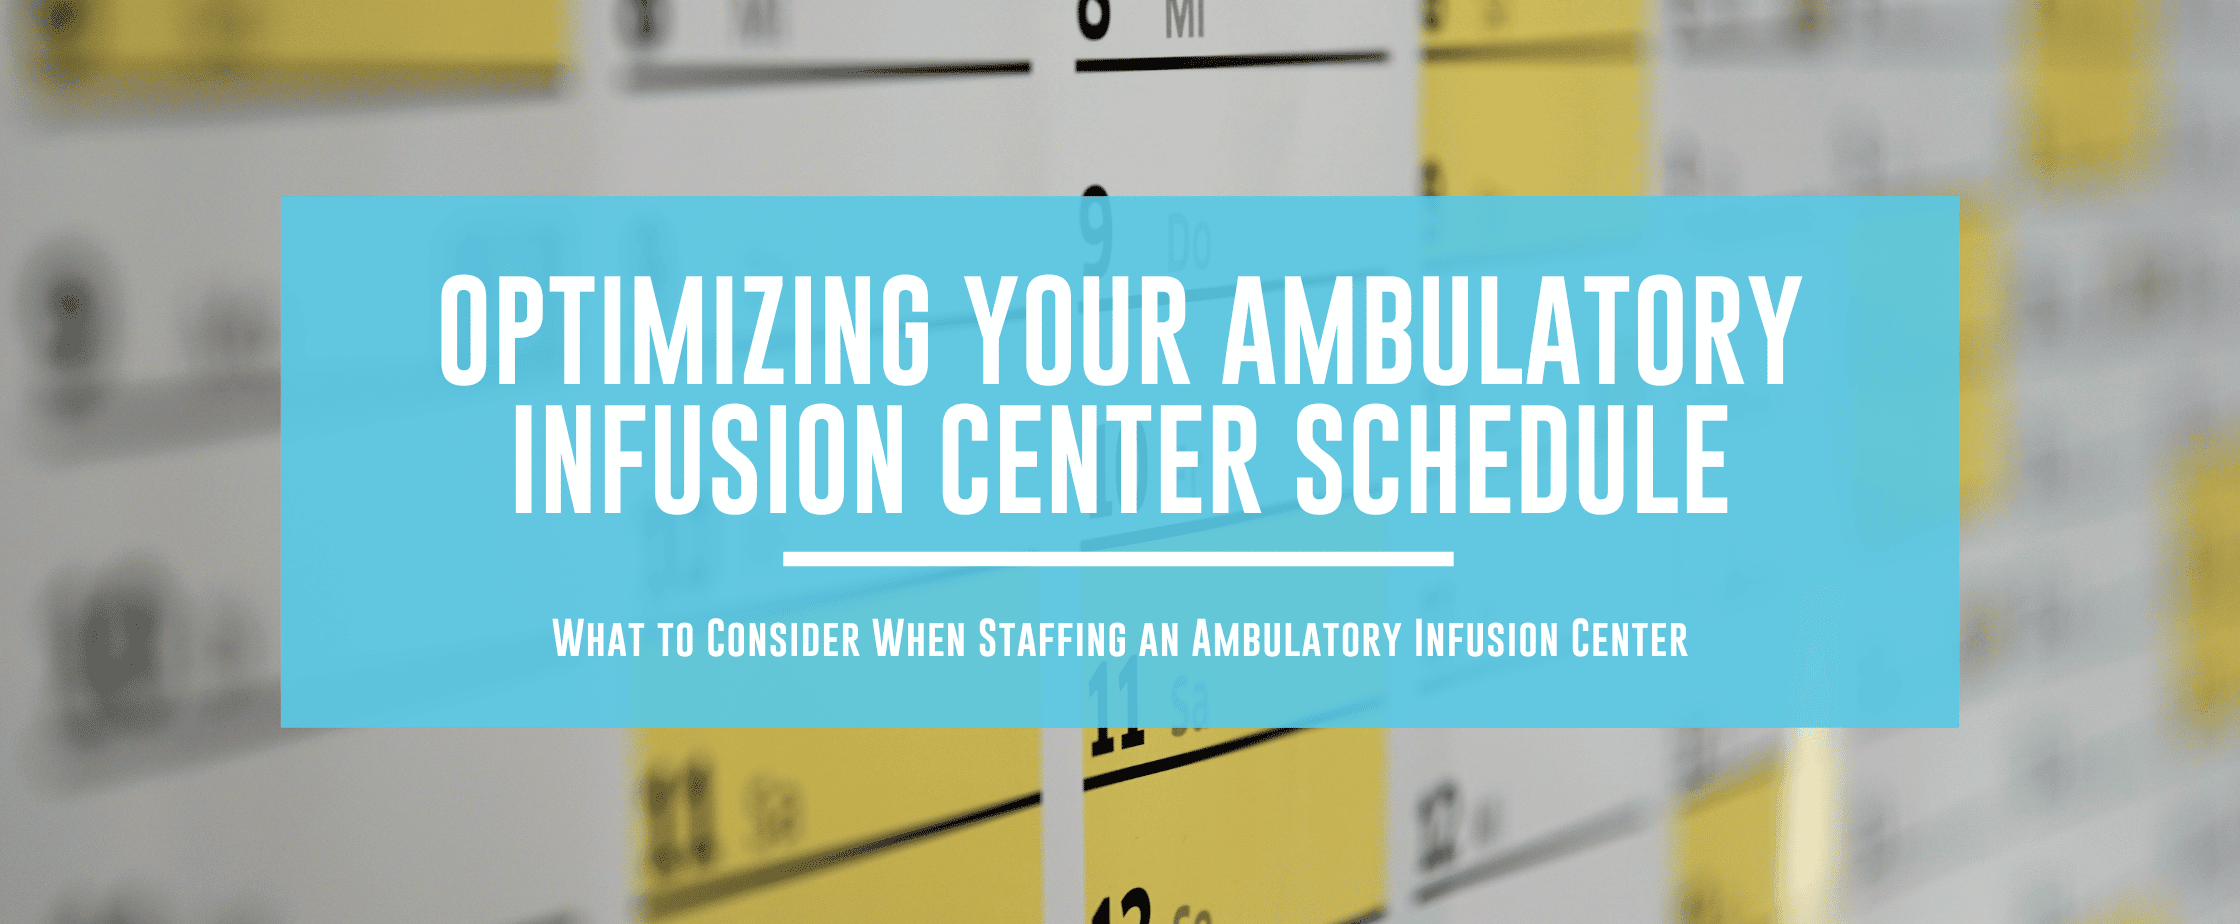 Featured image for Optimizing Your Ambulatory Infusion Center Schedule